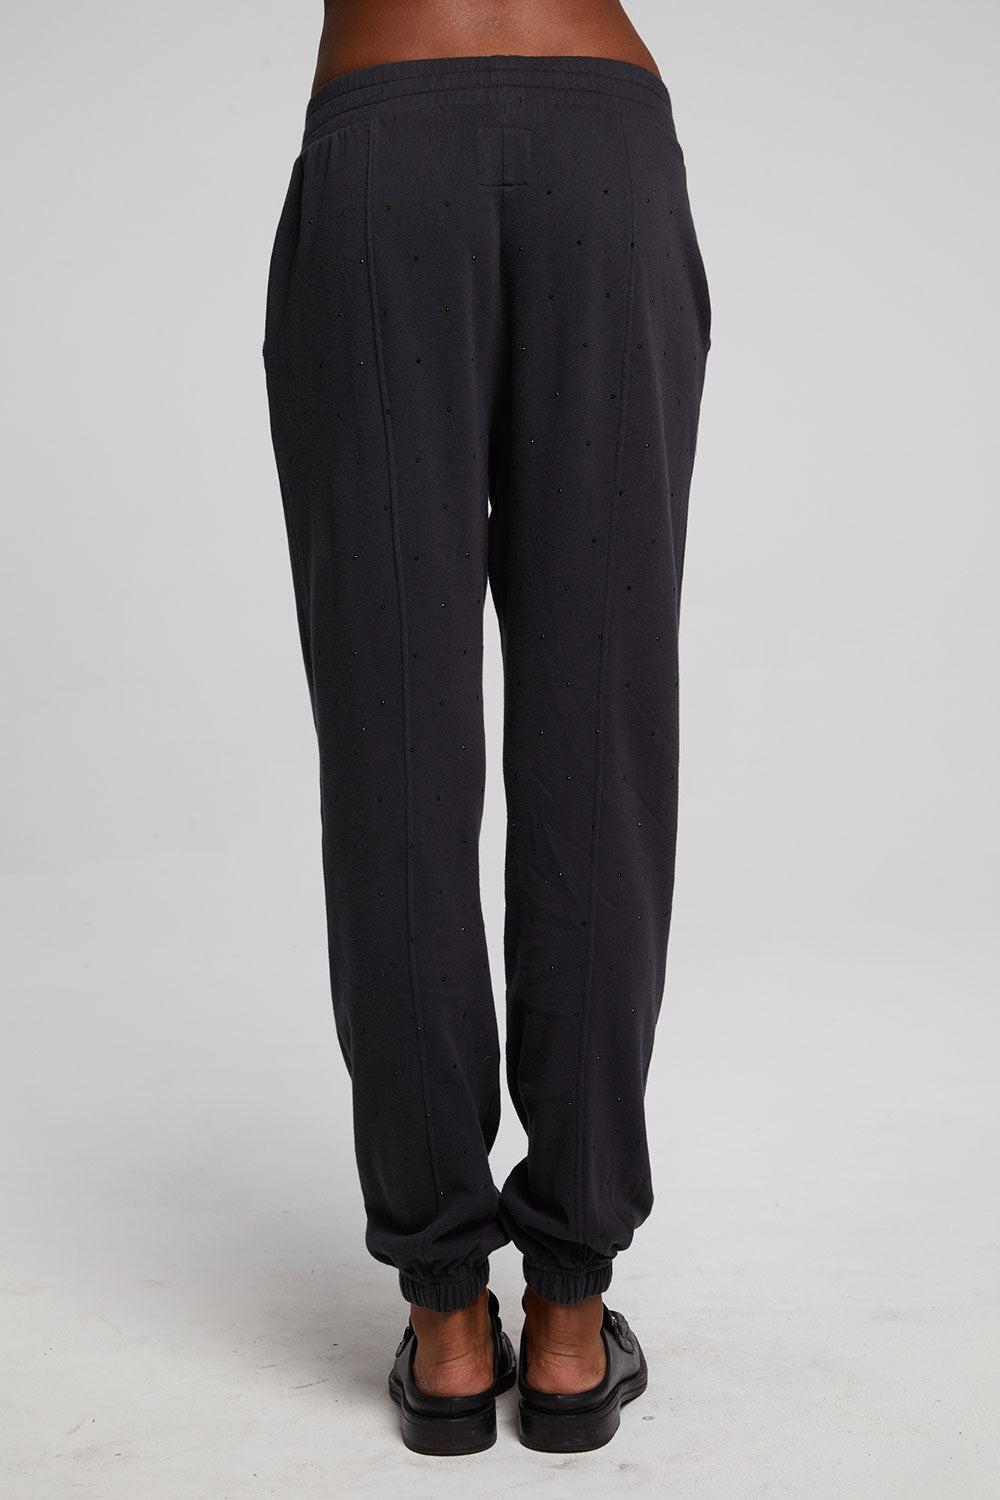 Essential Licorice Jogger WOMENS chaserbrand